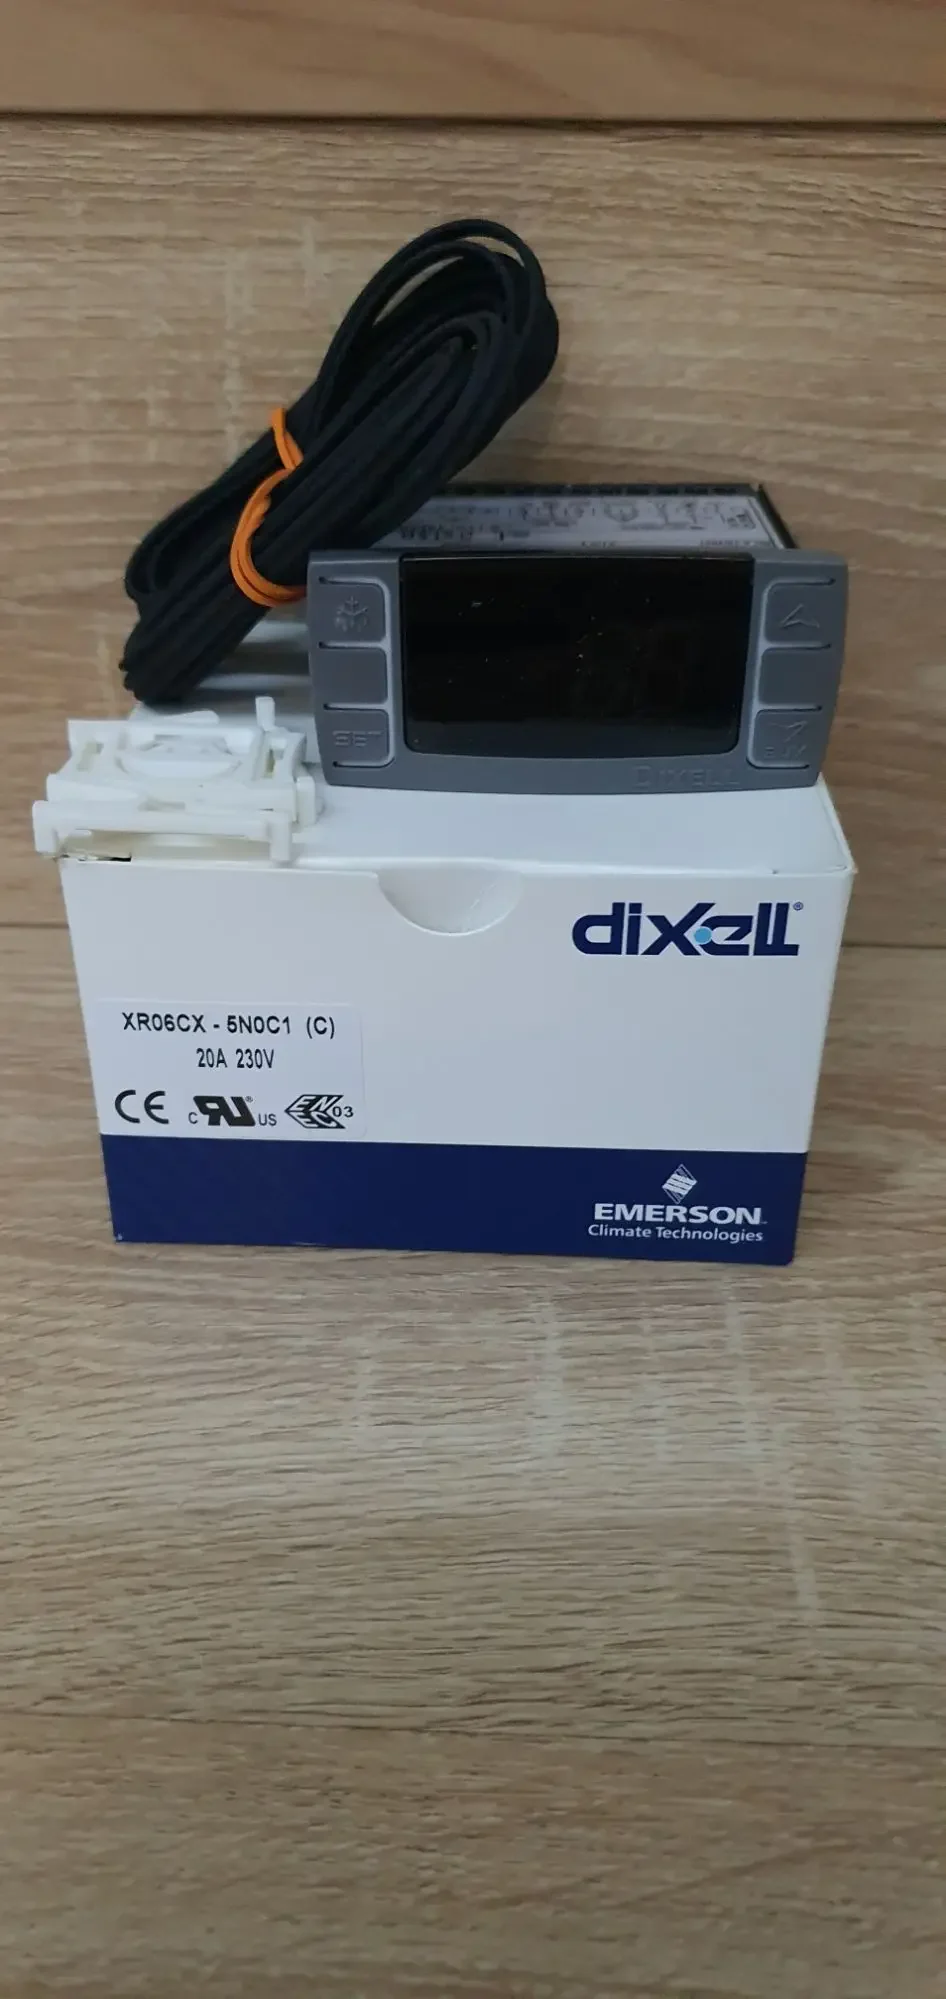 Dixell chiller and freezer digital thermostat